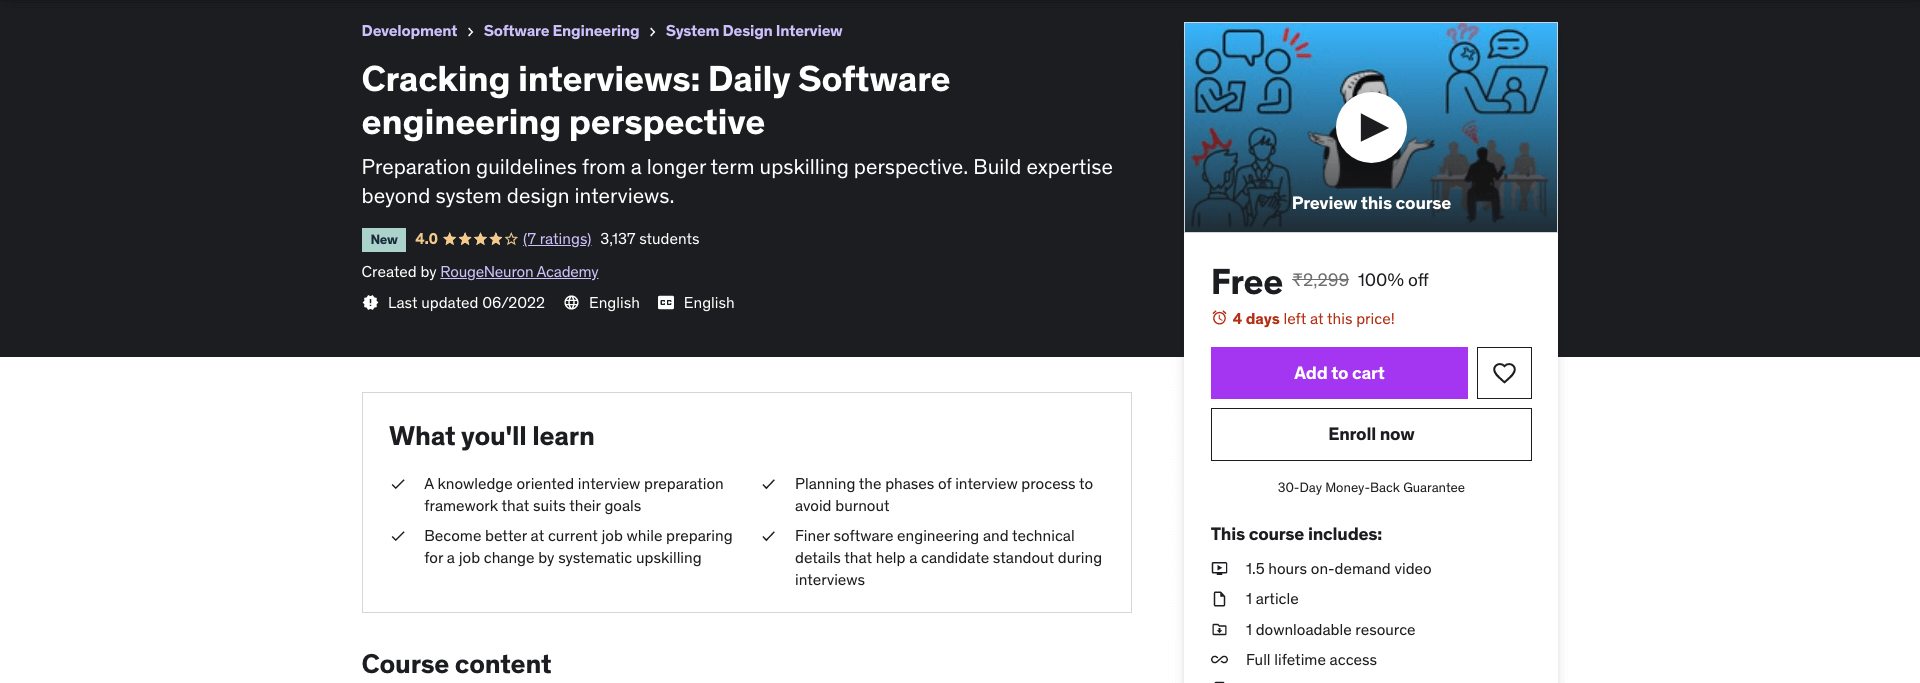 Cracking interviews: Daily Software engineering perspective